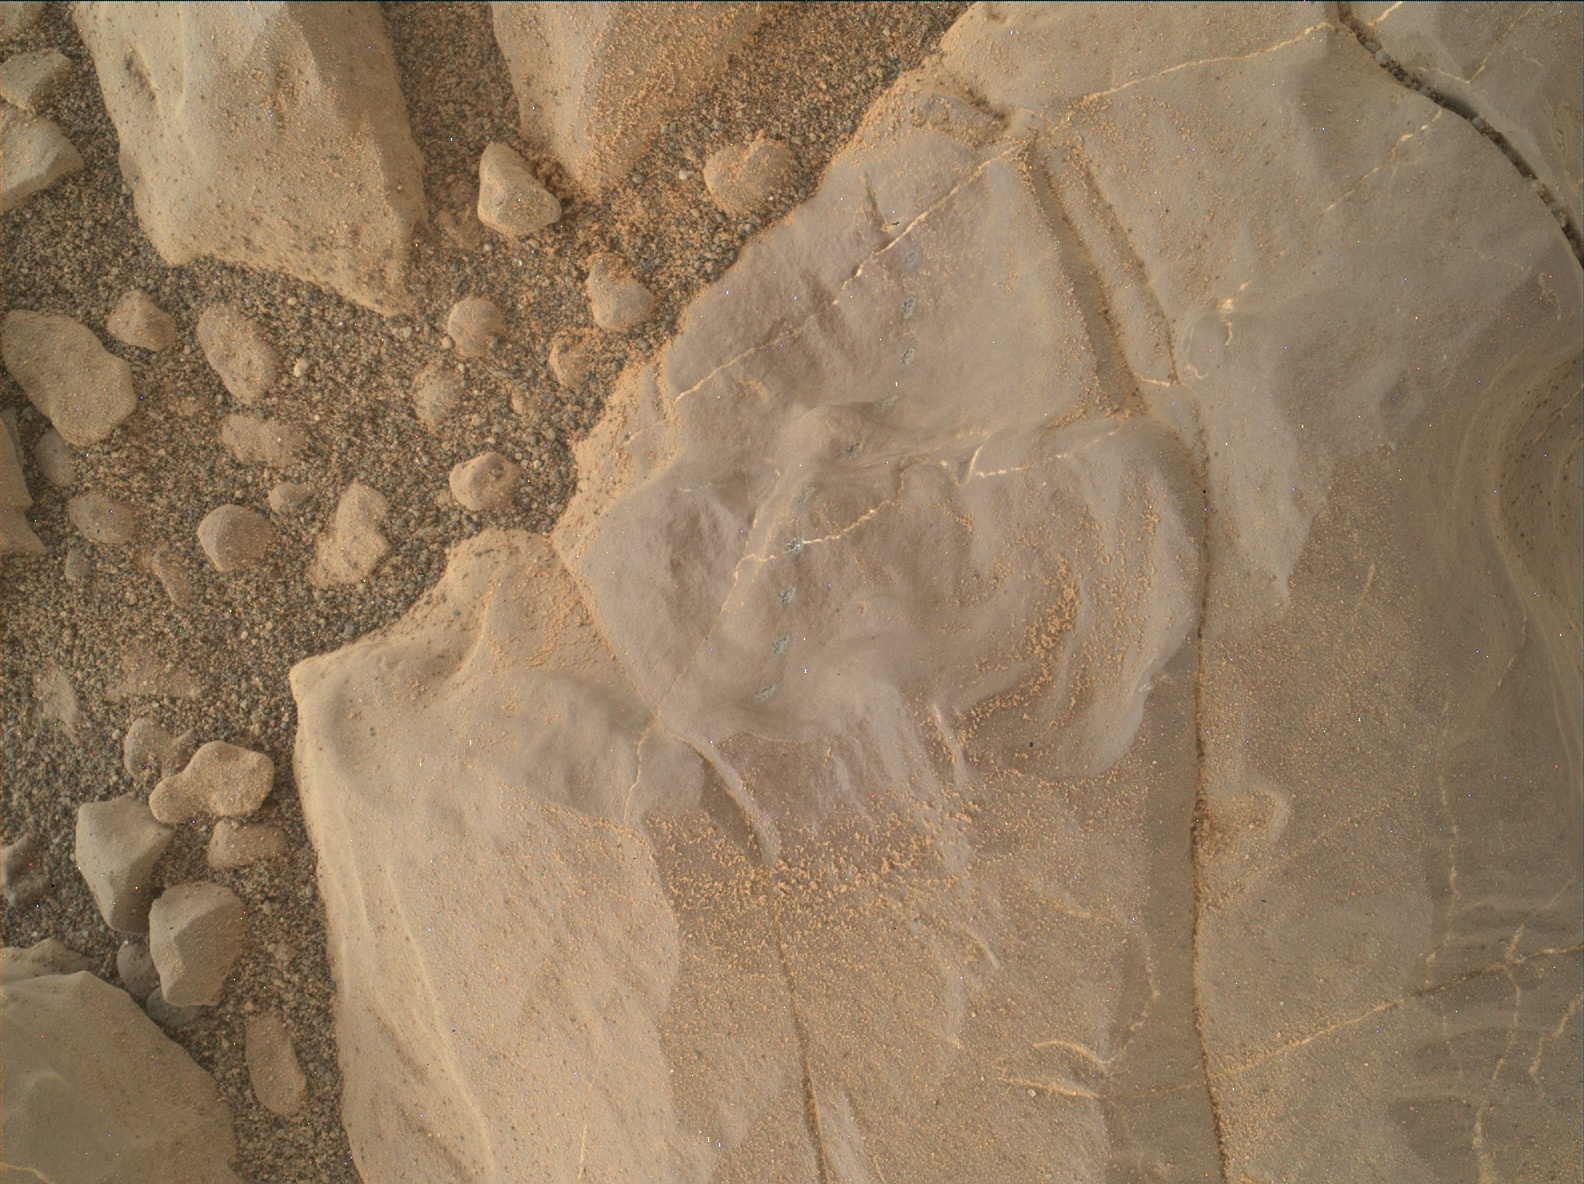 Nasa's Mars rover Curiosity acquired this image using its Mars Hand Lens Imager (MAHLI) on Sol 1907